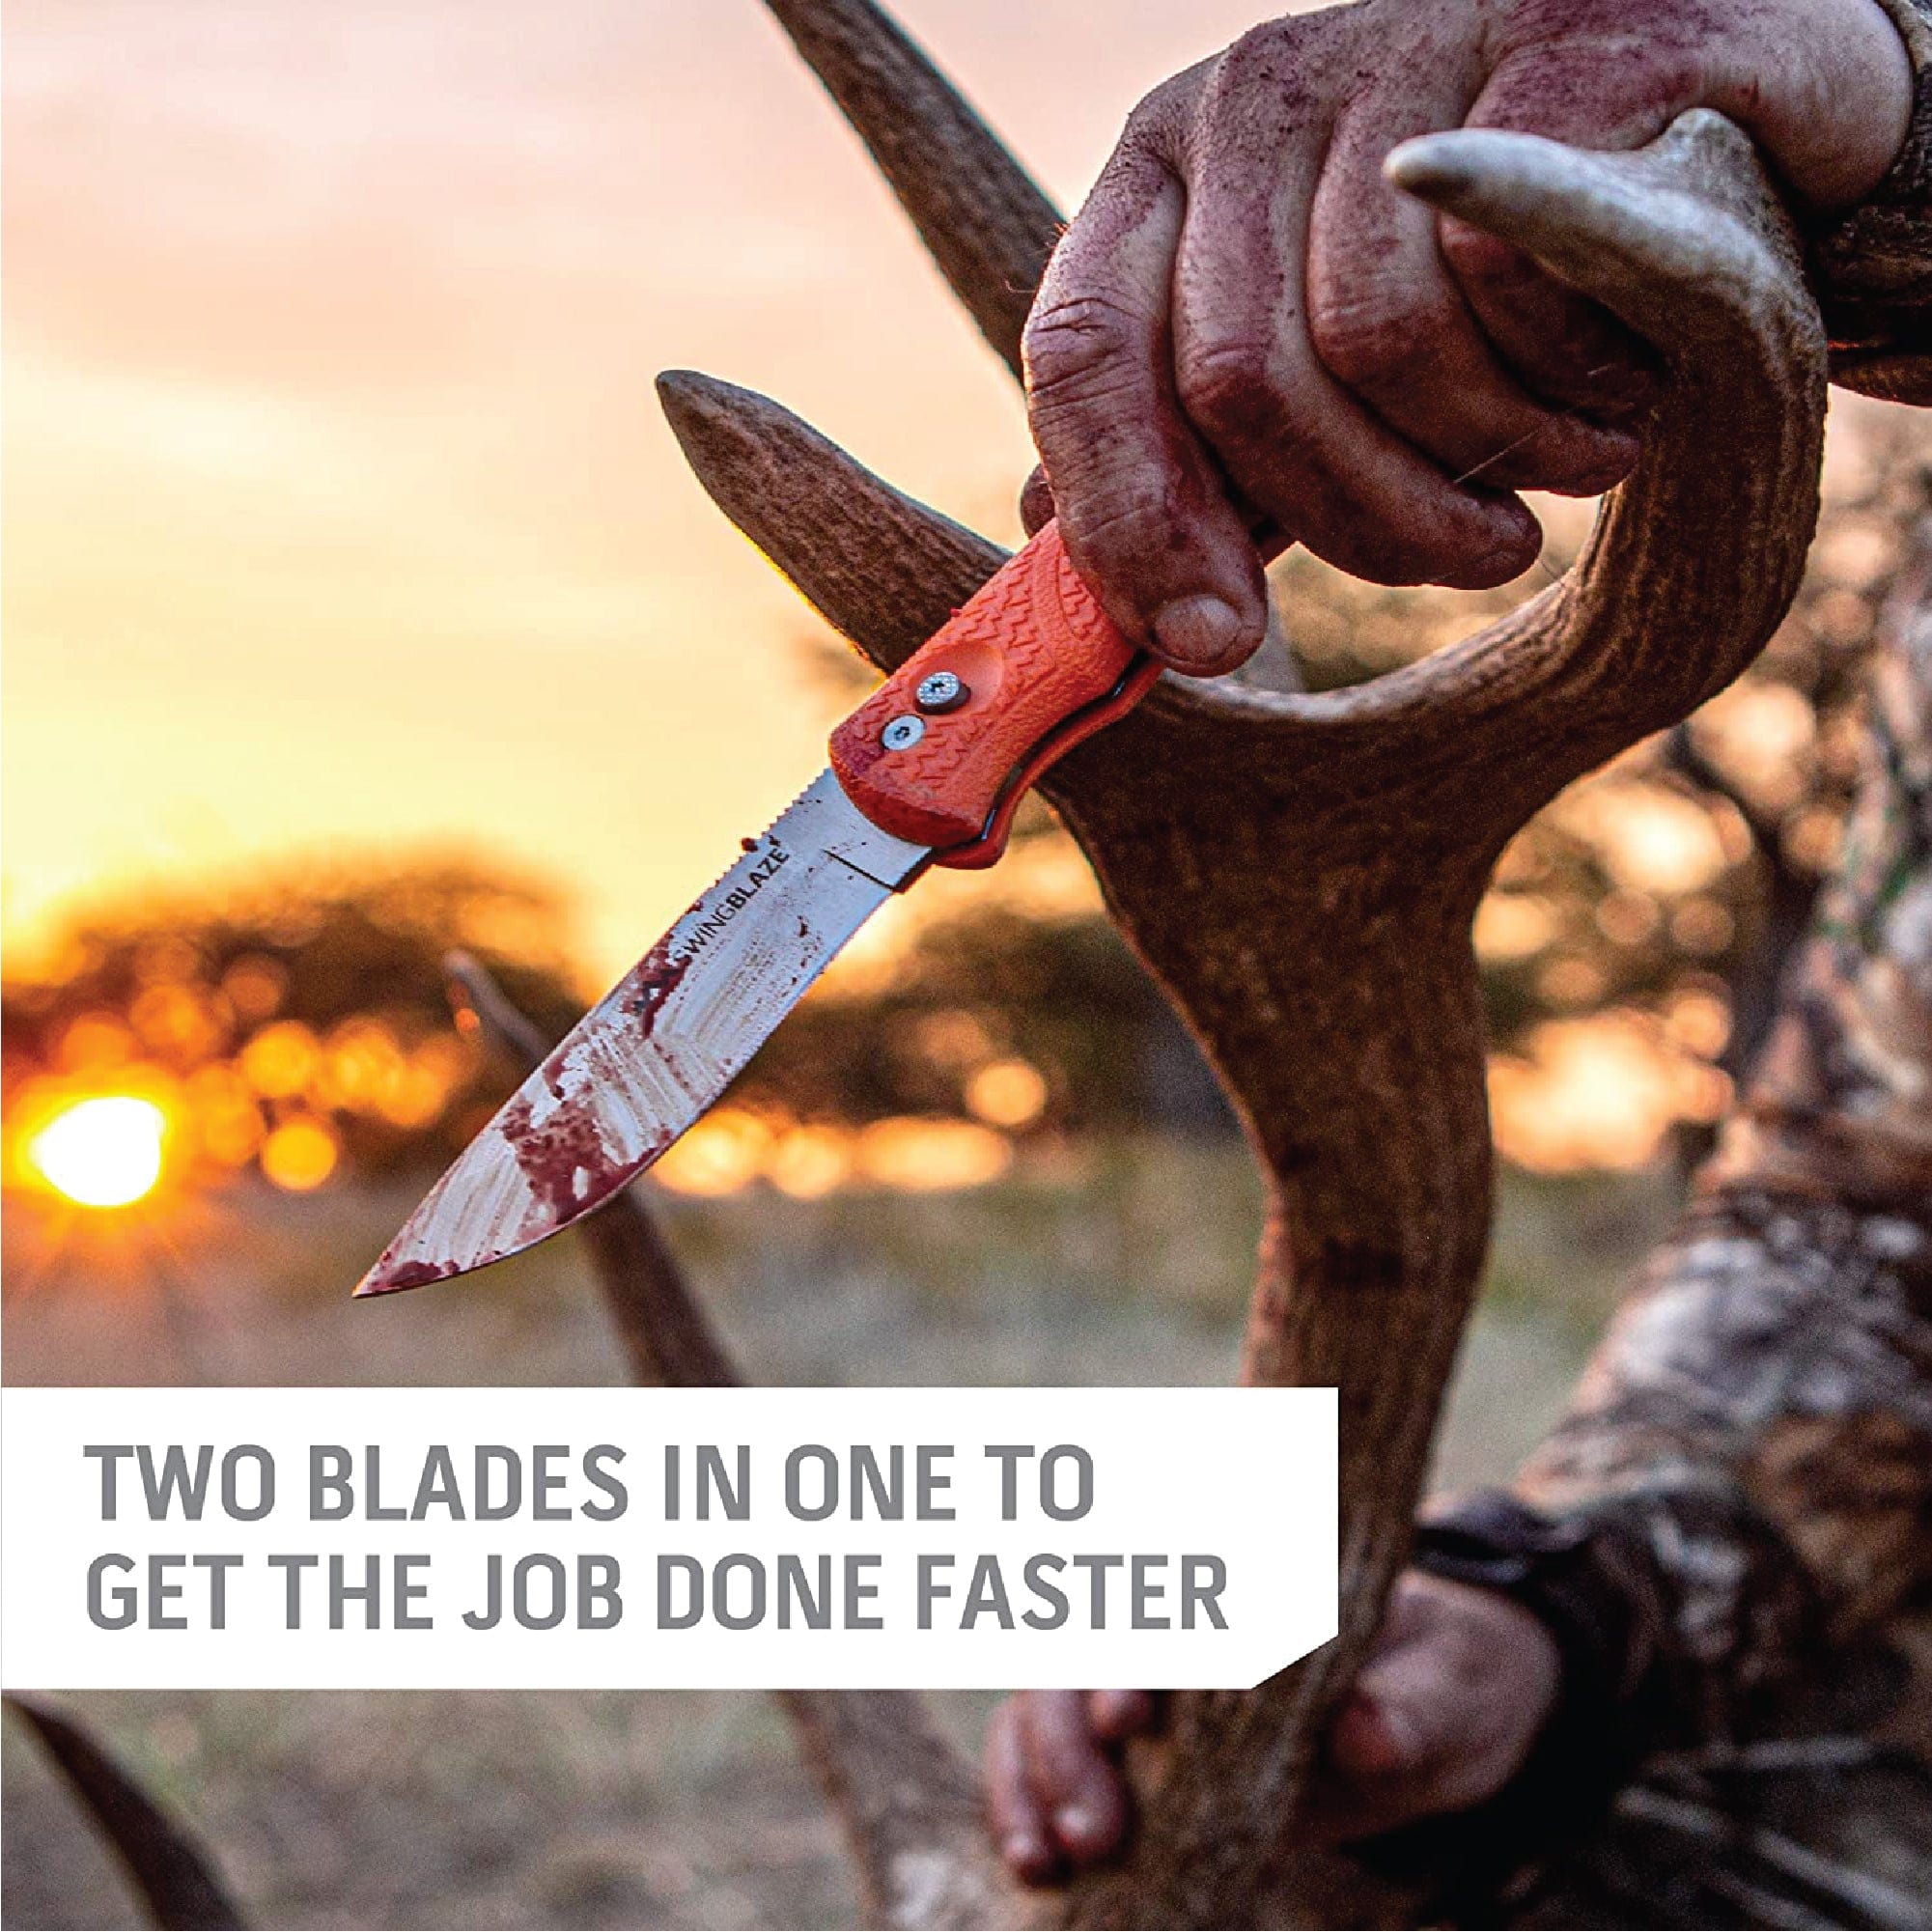 Outdoor Edge SwingBlade Hunting Knife with text saying two Blades in one to get the job done faster.